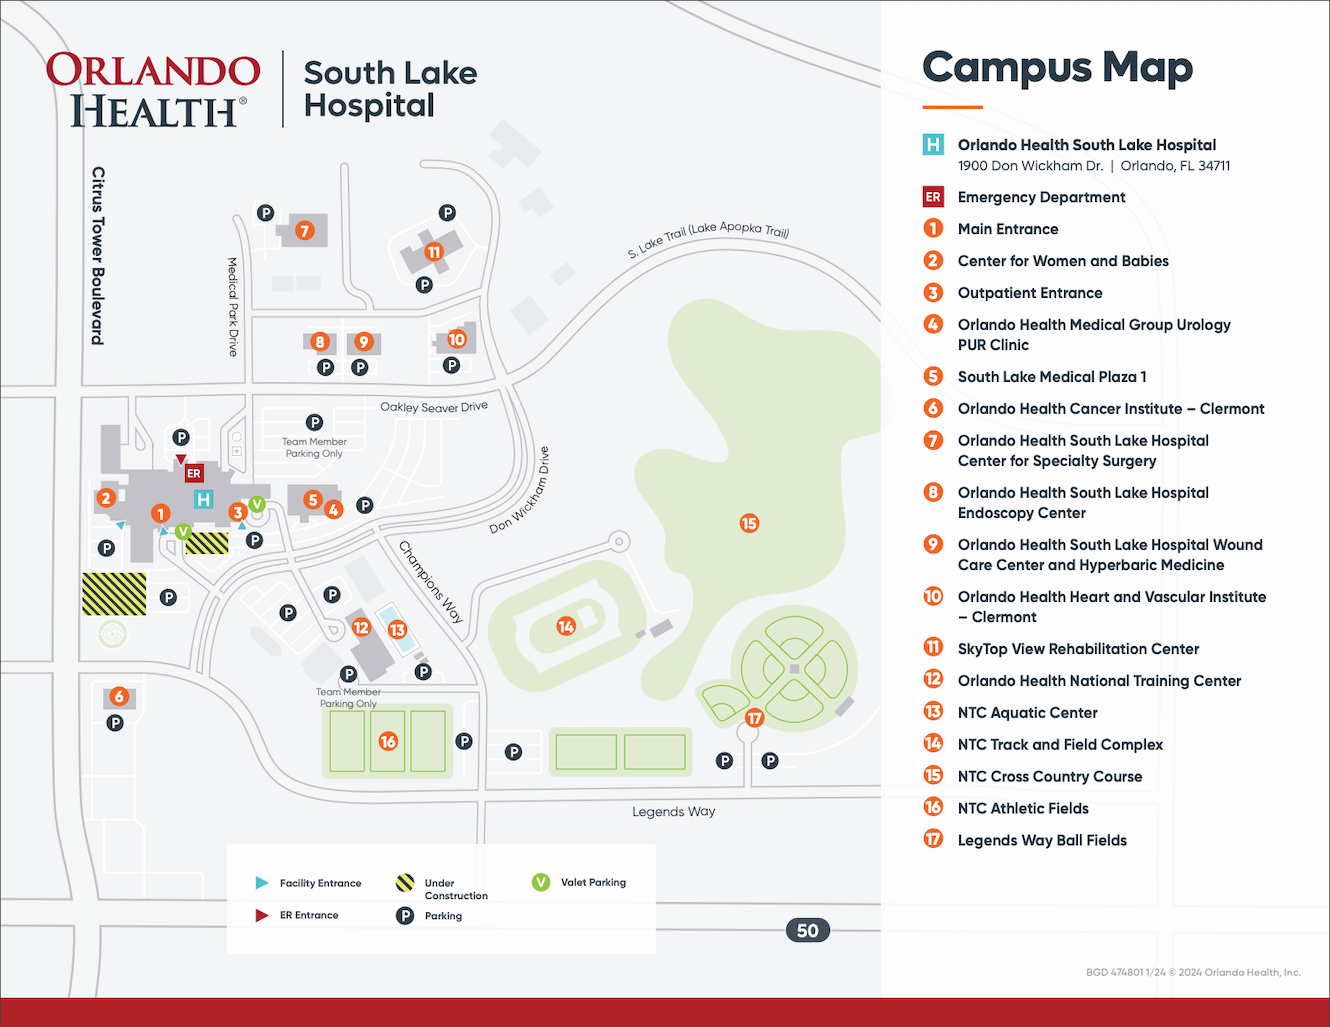 Map of Orlando Health South Lake Hospital campus. A PDF of the map can be downloaded at the bottom of the page.